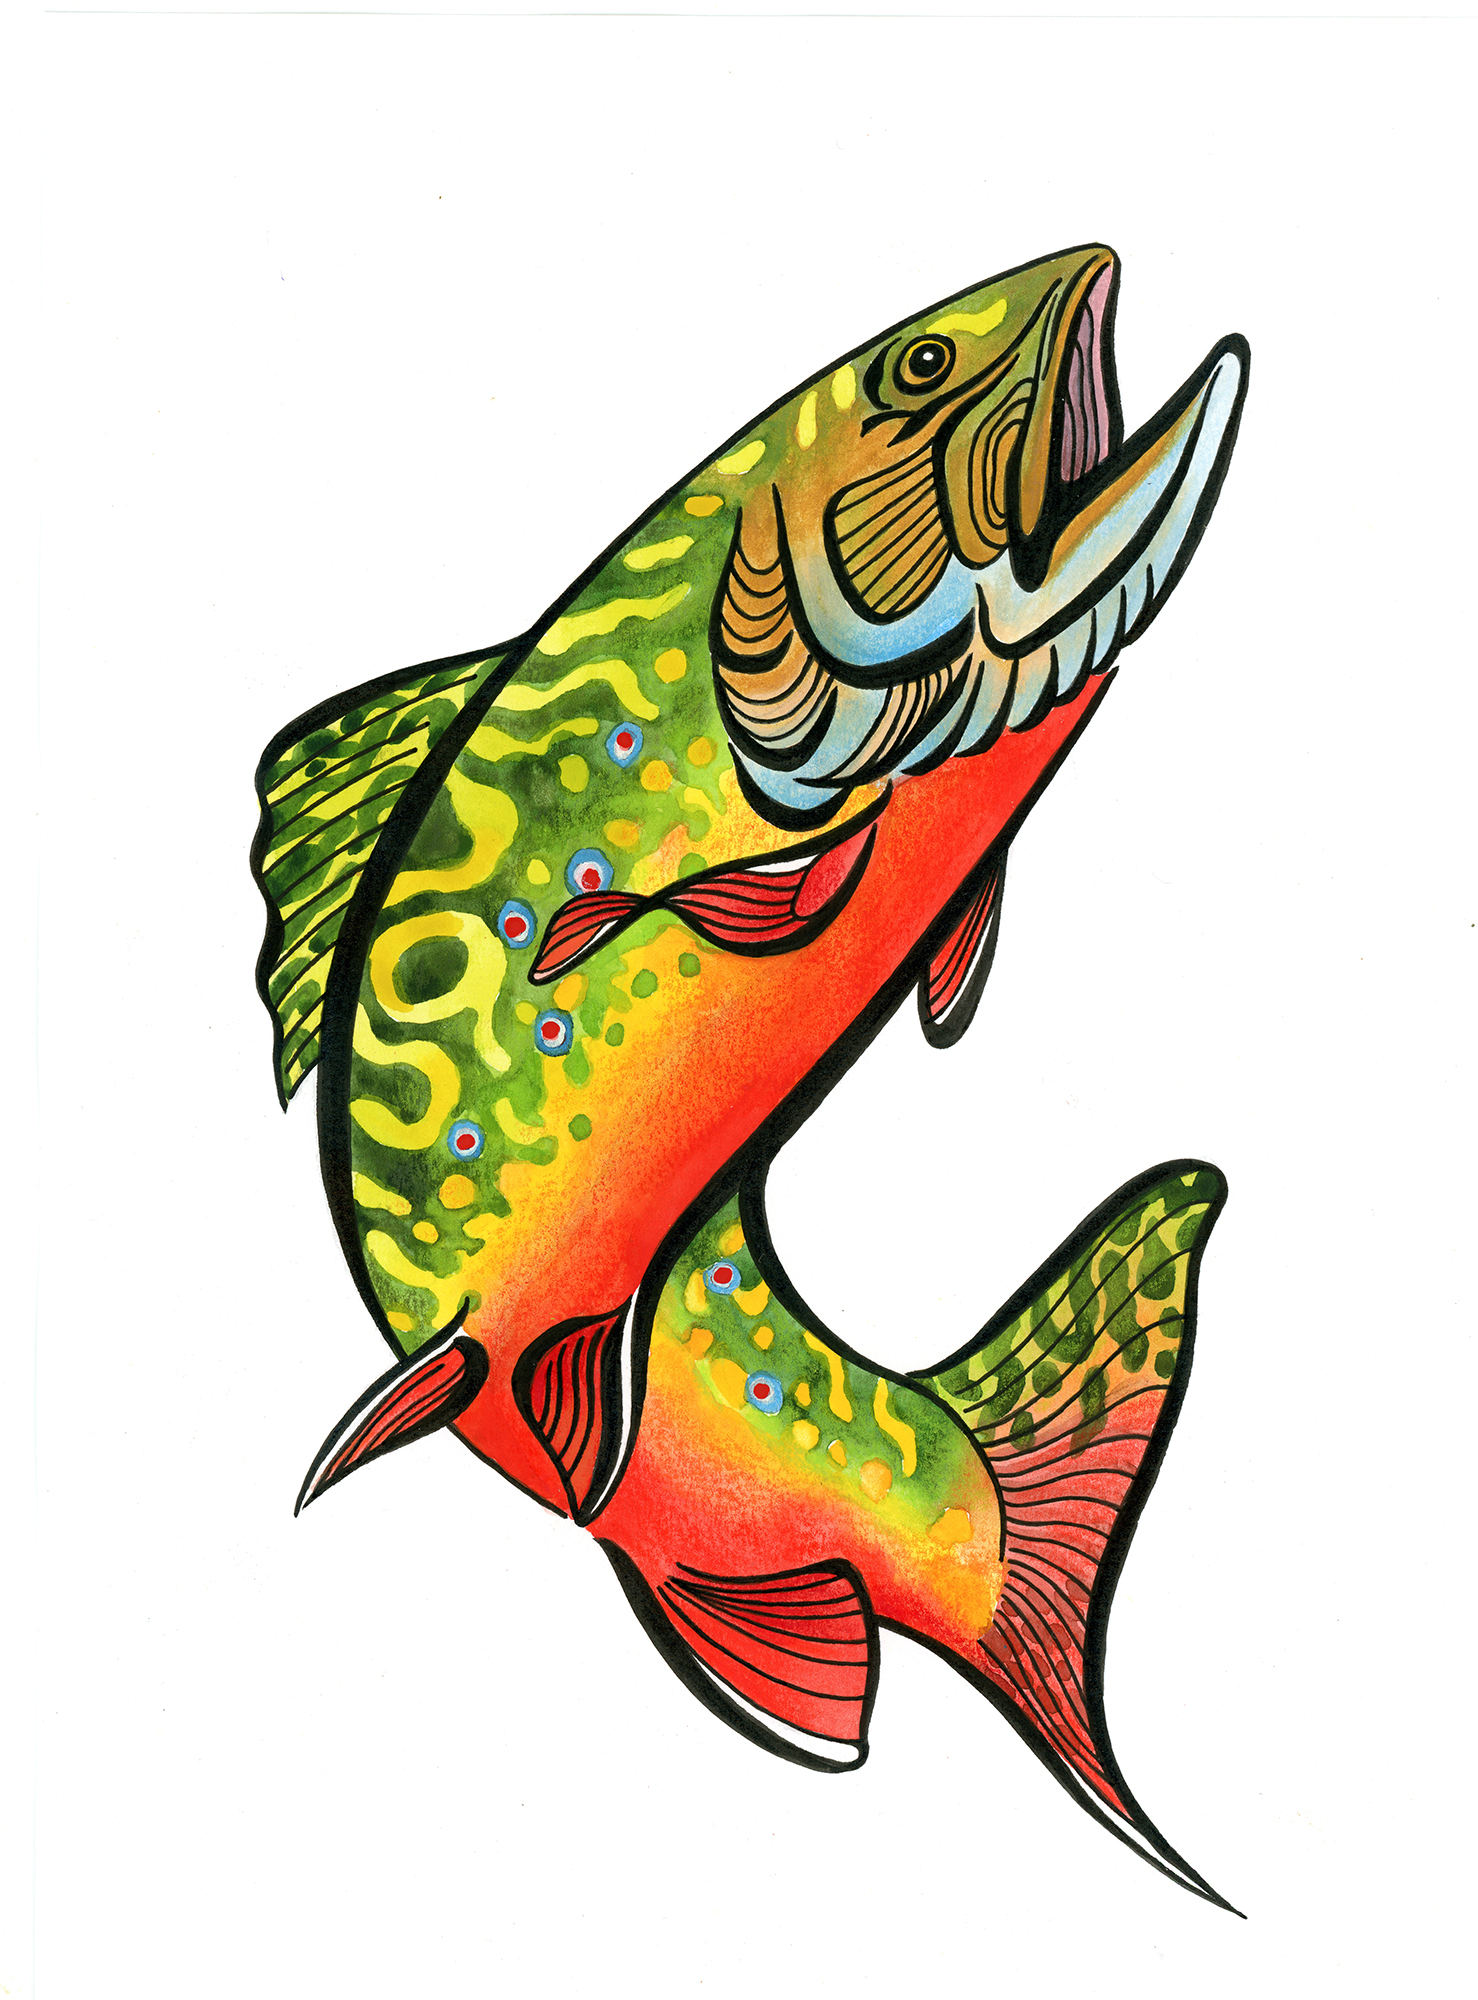 Illustration of green and gold fish with orange belly.